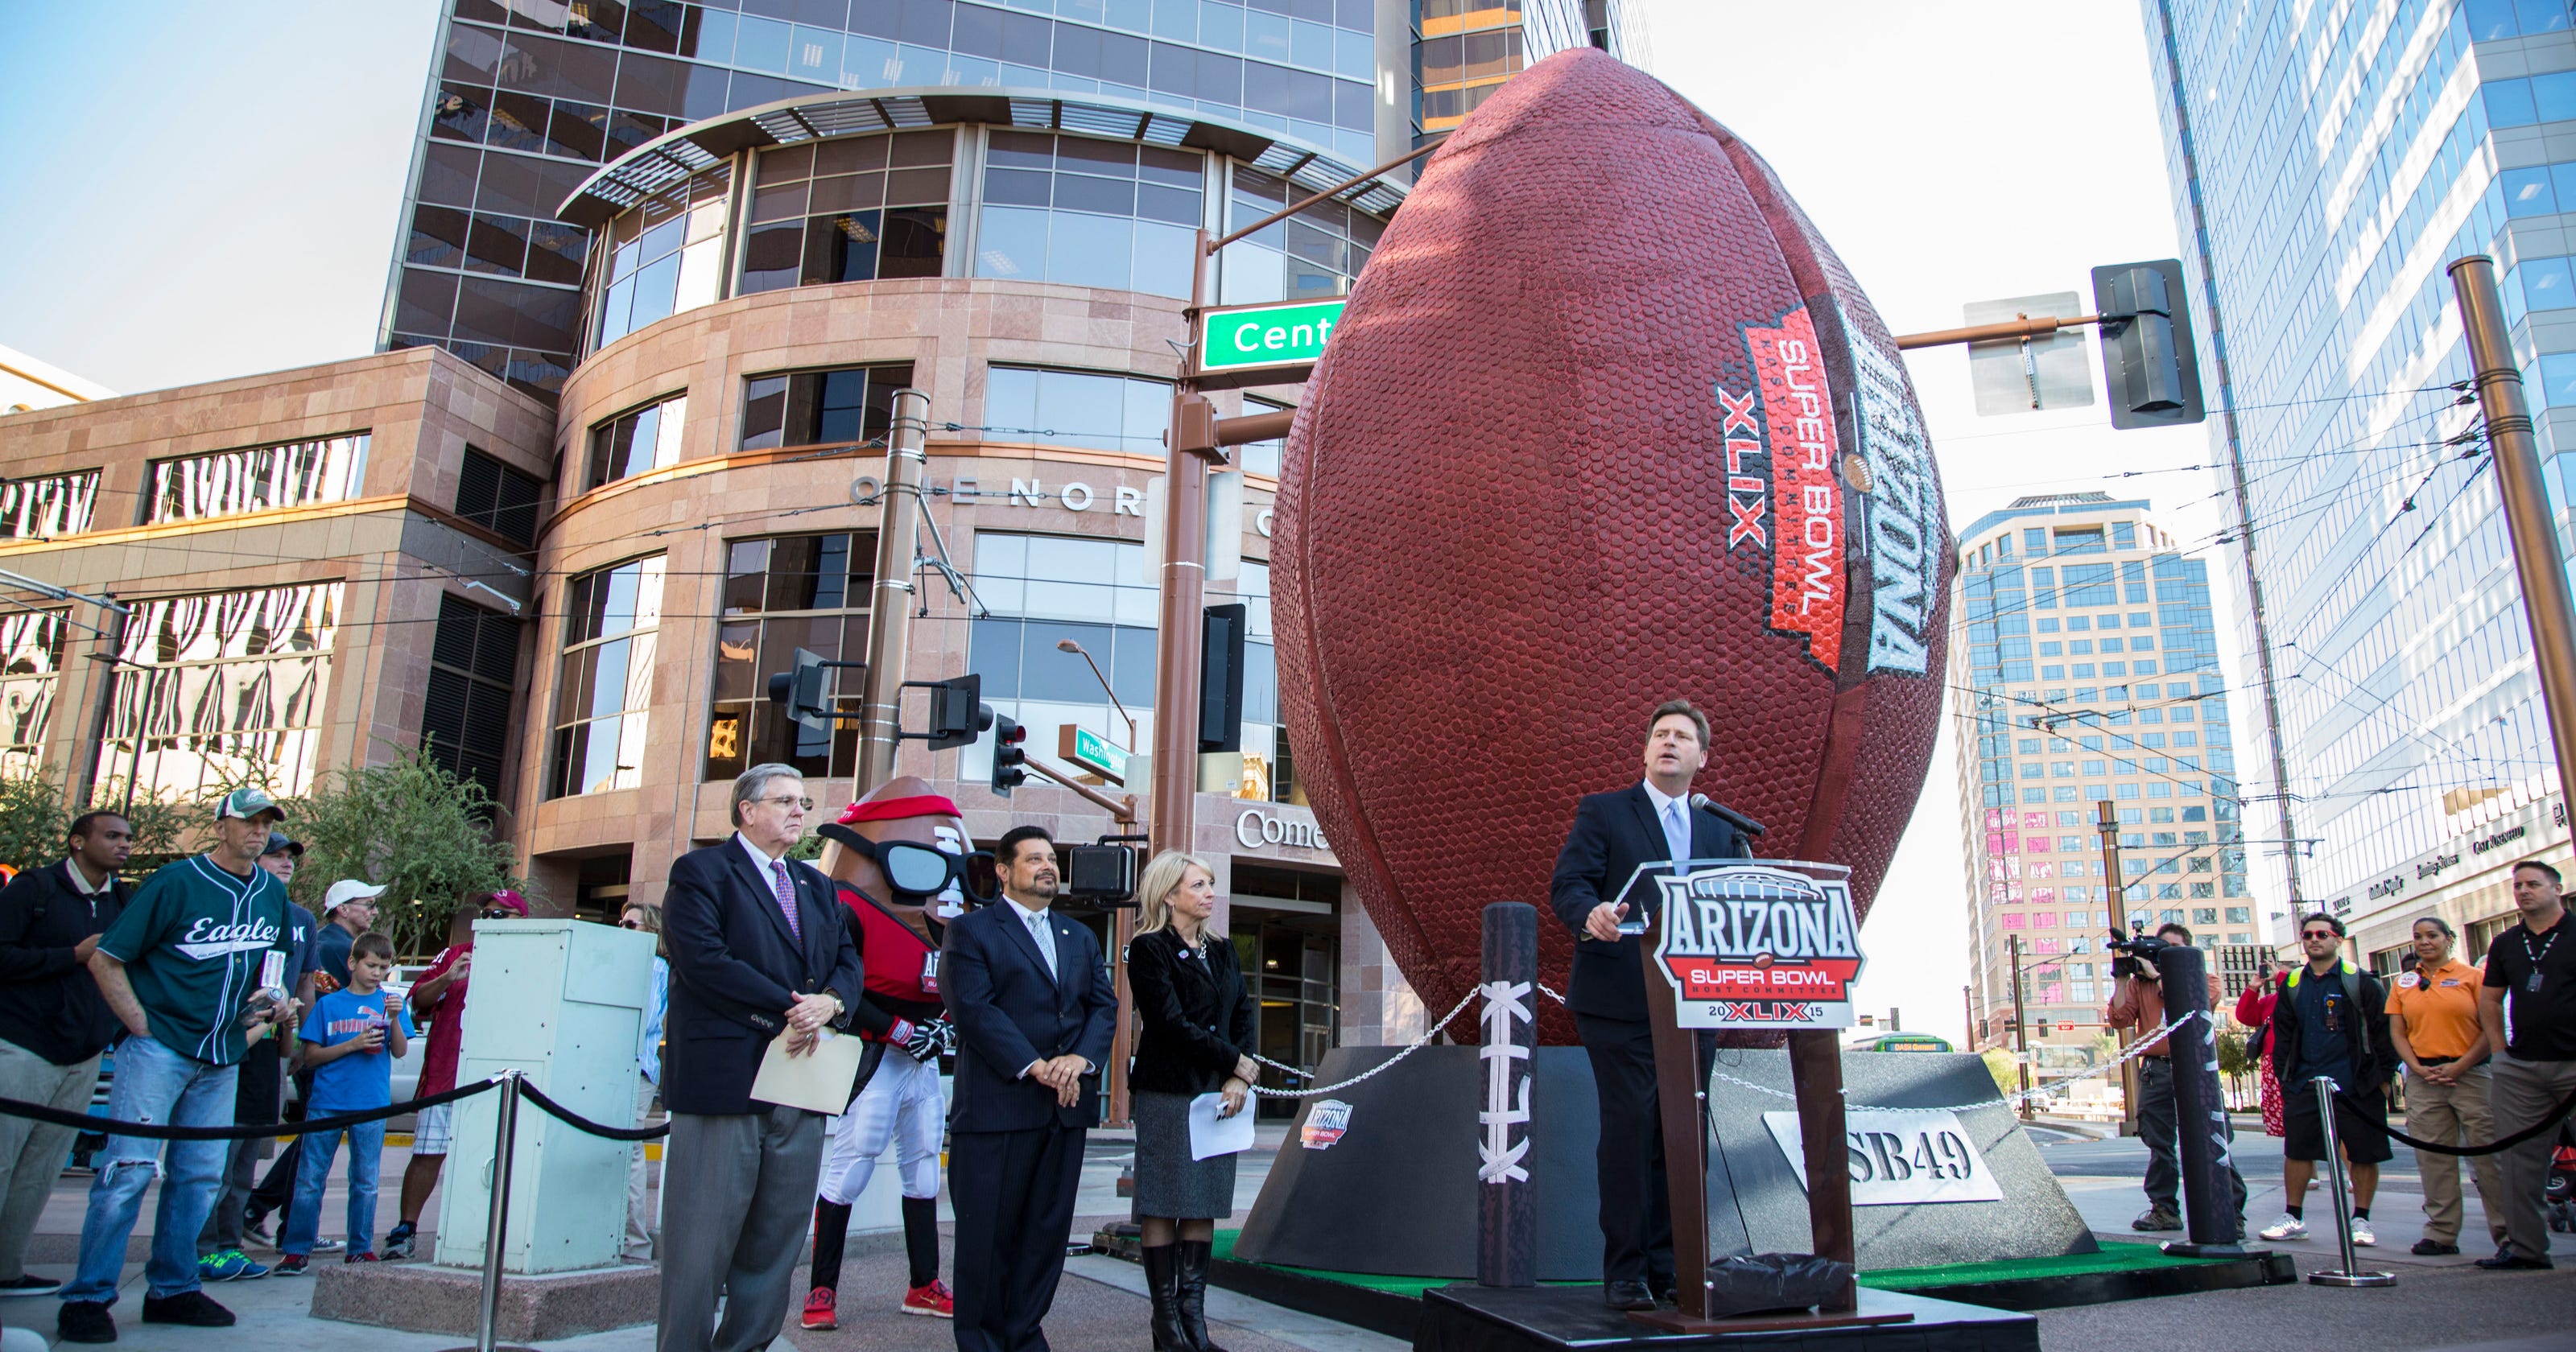 Huge Super Bowl football unveiled in downtown Phoenix